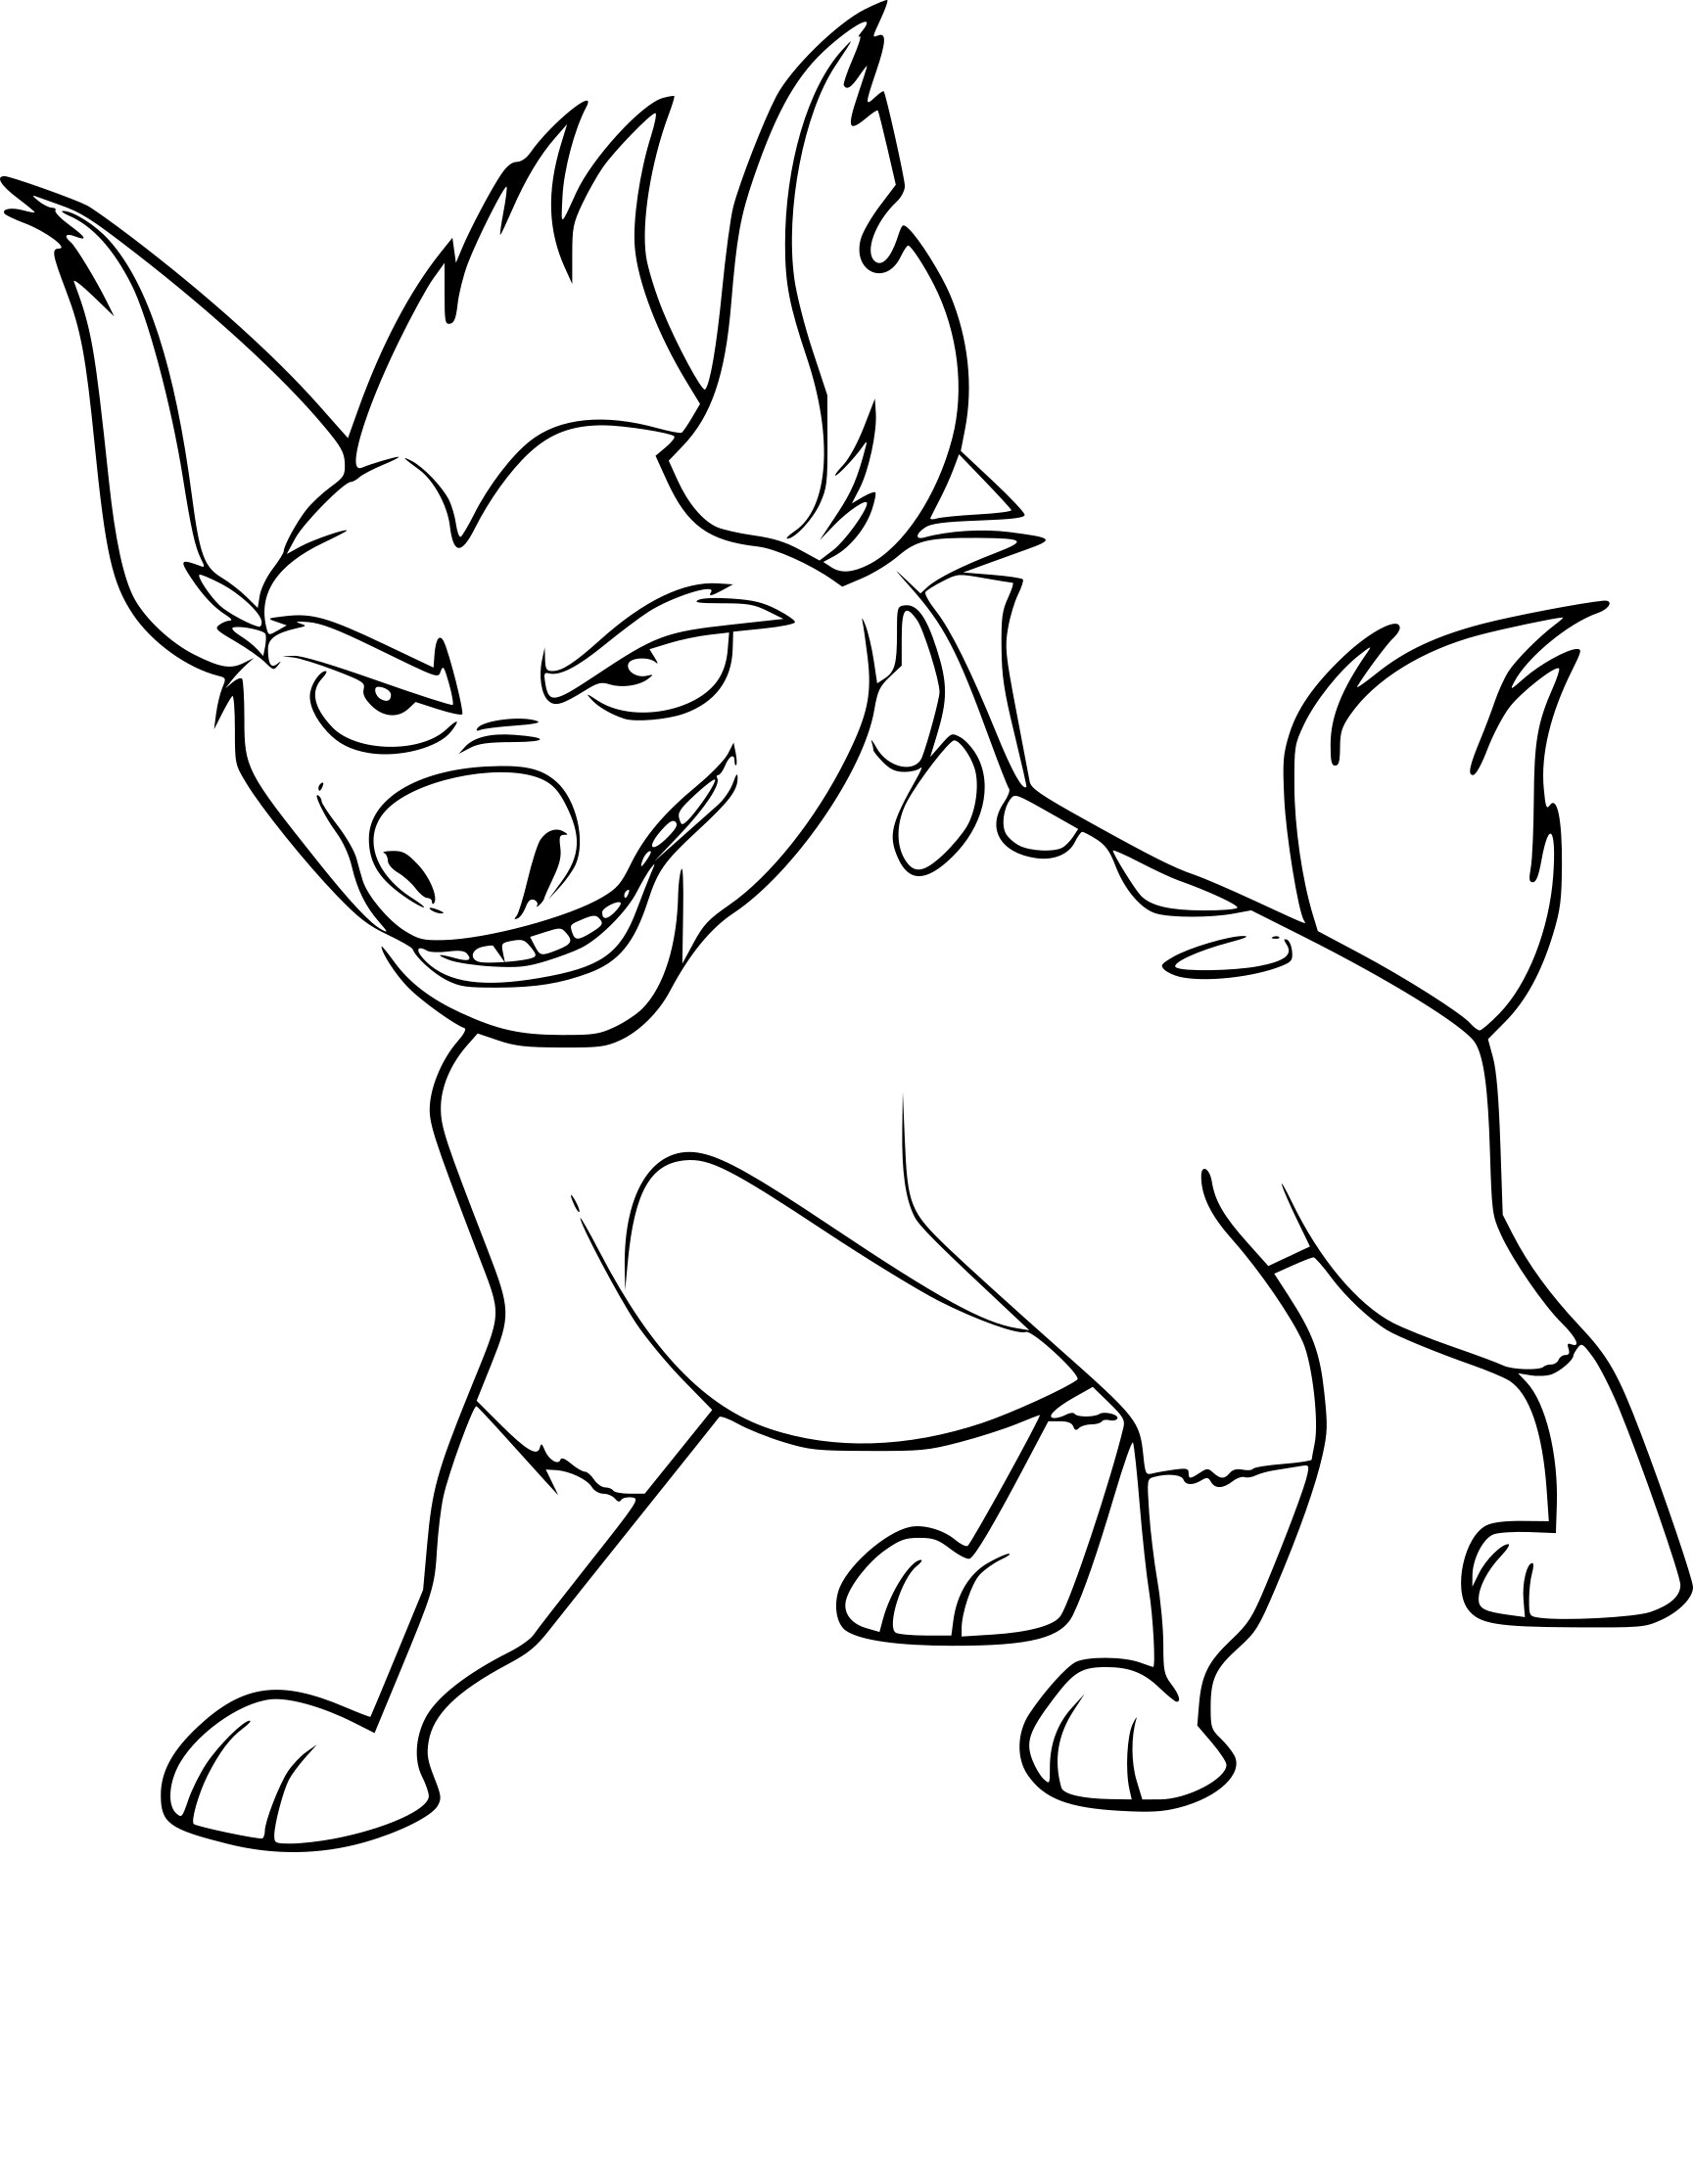 Janja Guard Of The Lion King coloring page